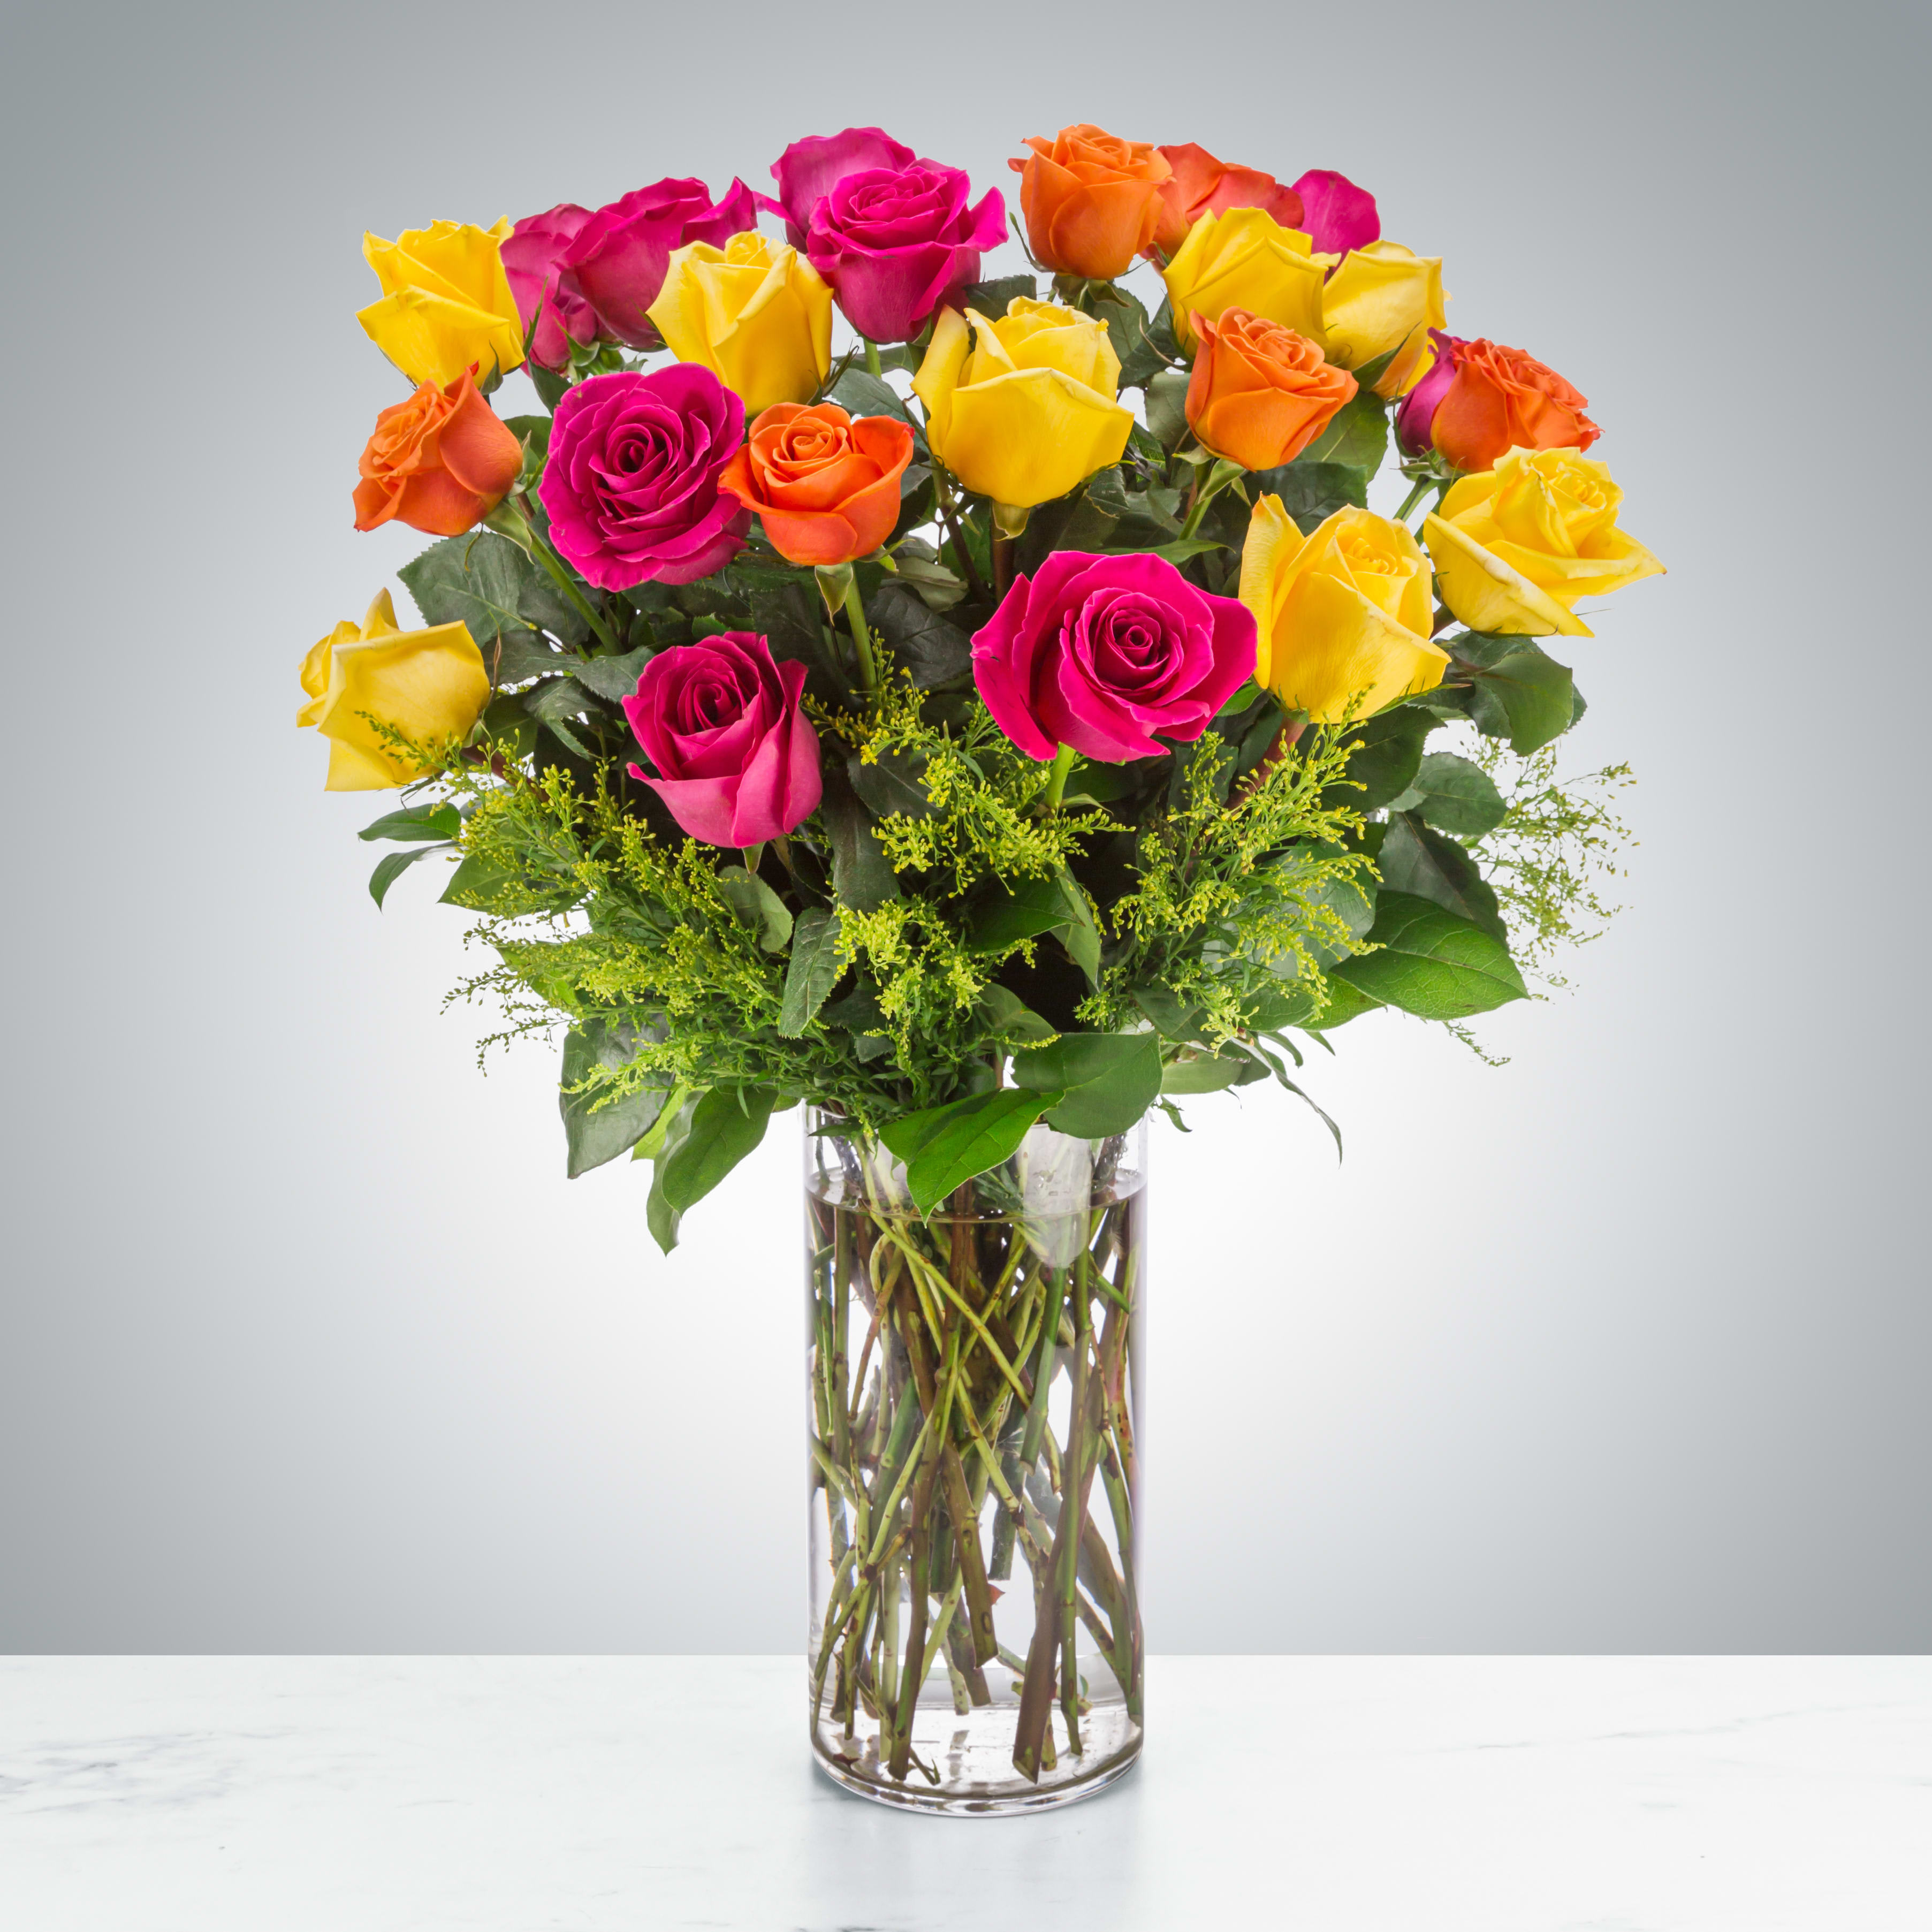 The Sound of Joy  - Long-stemmed rose arrangement perfect any occasion for any celebration or showing your appreciation. A great alternative to the classic red rose, send a giant arrangement of multicolored bright roses. Glass container and colors can vary depending on availability. 